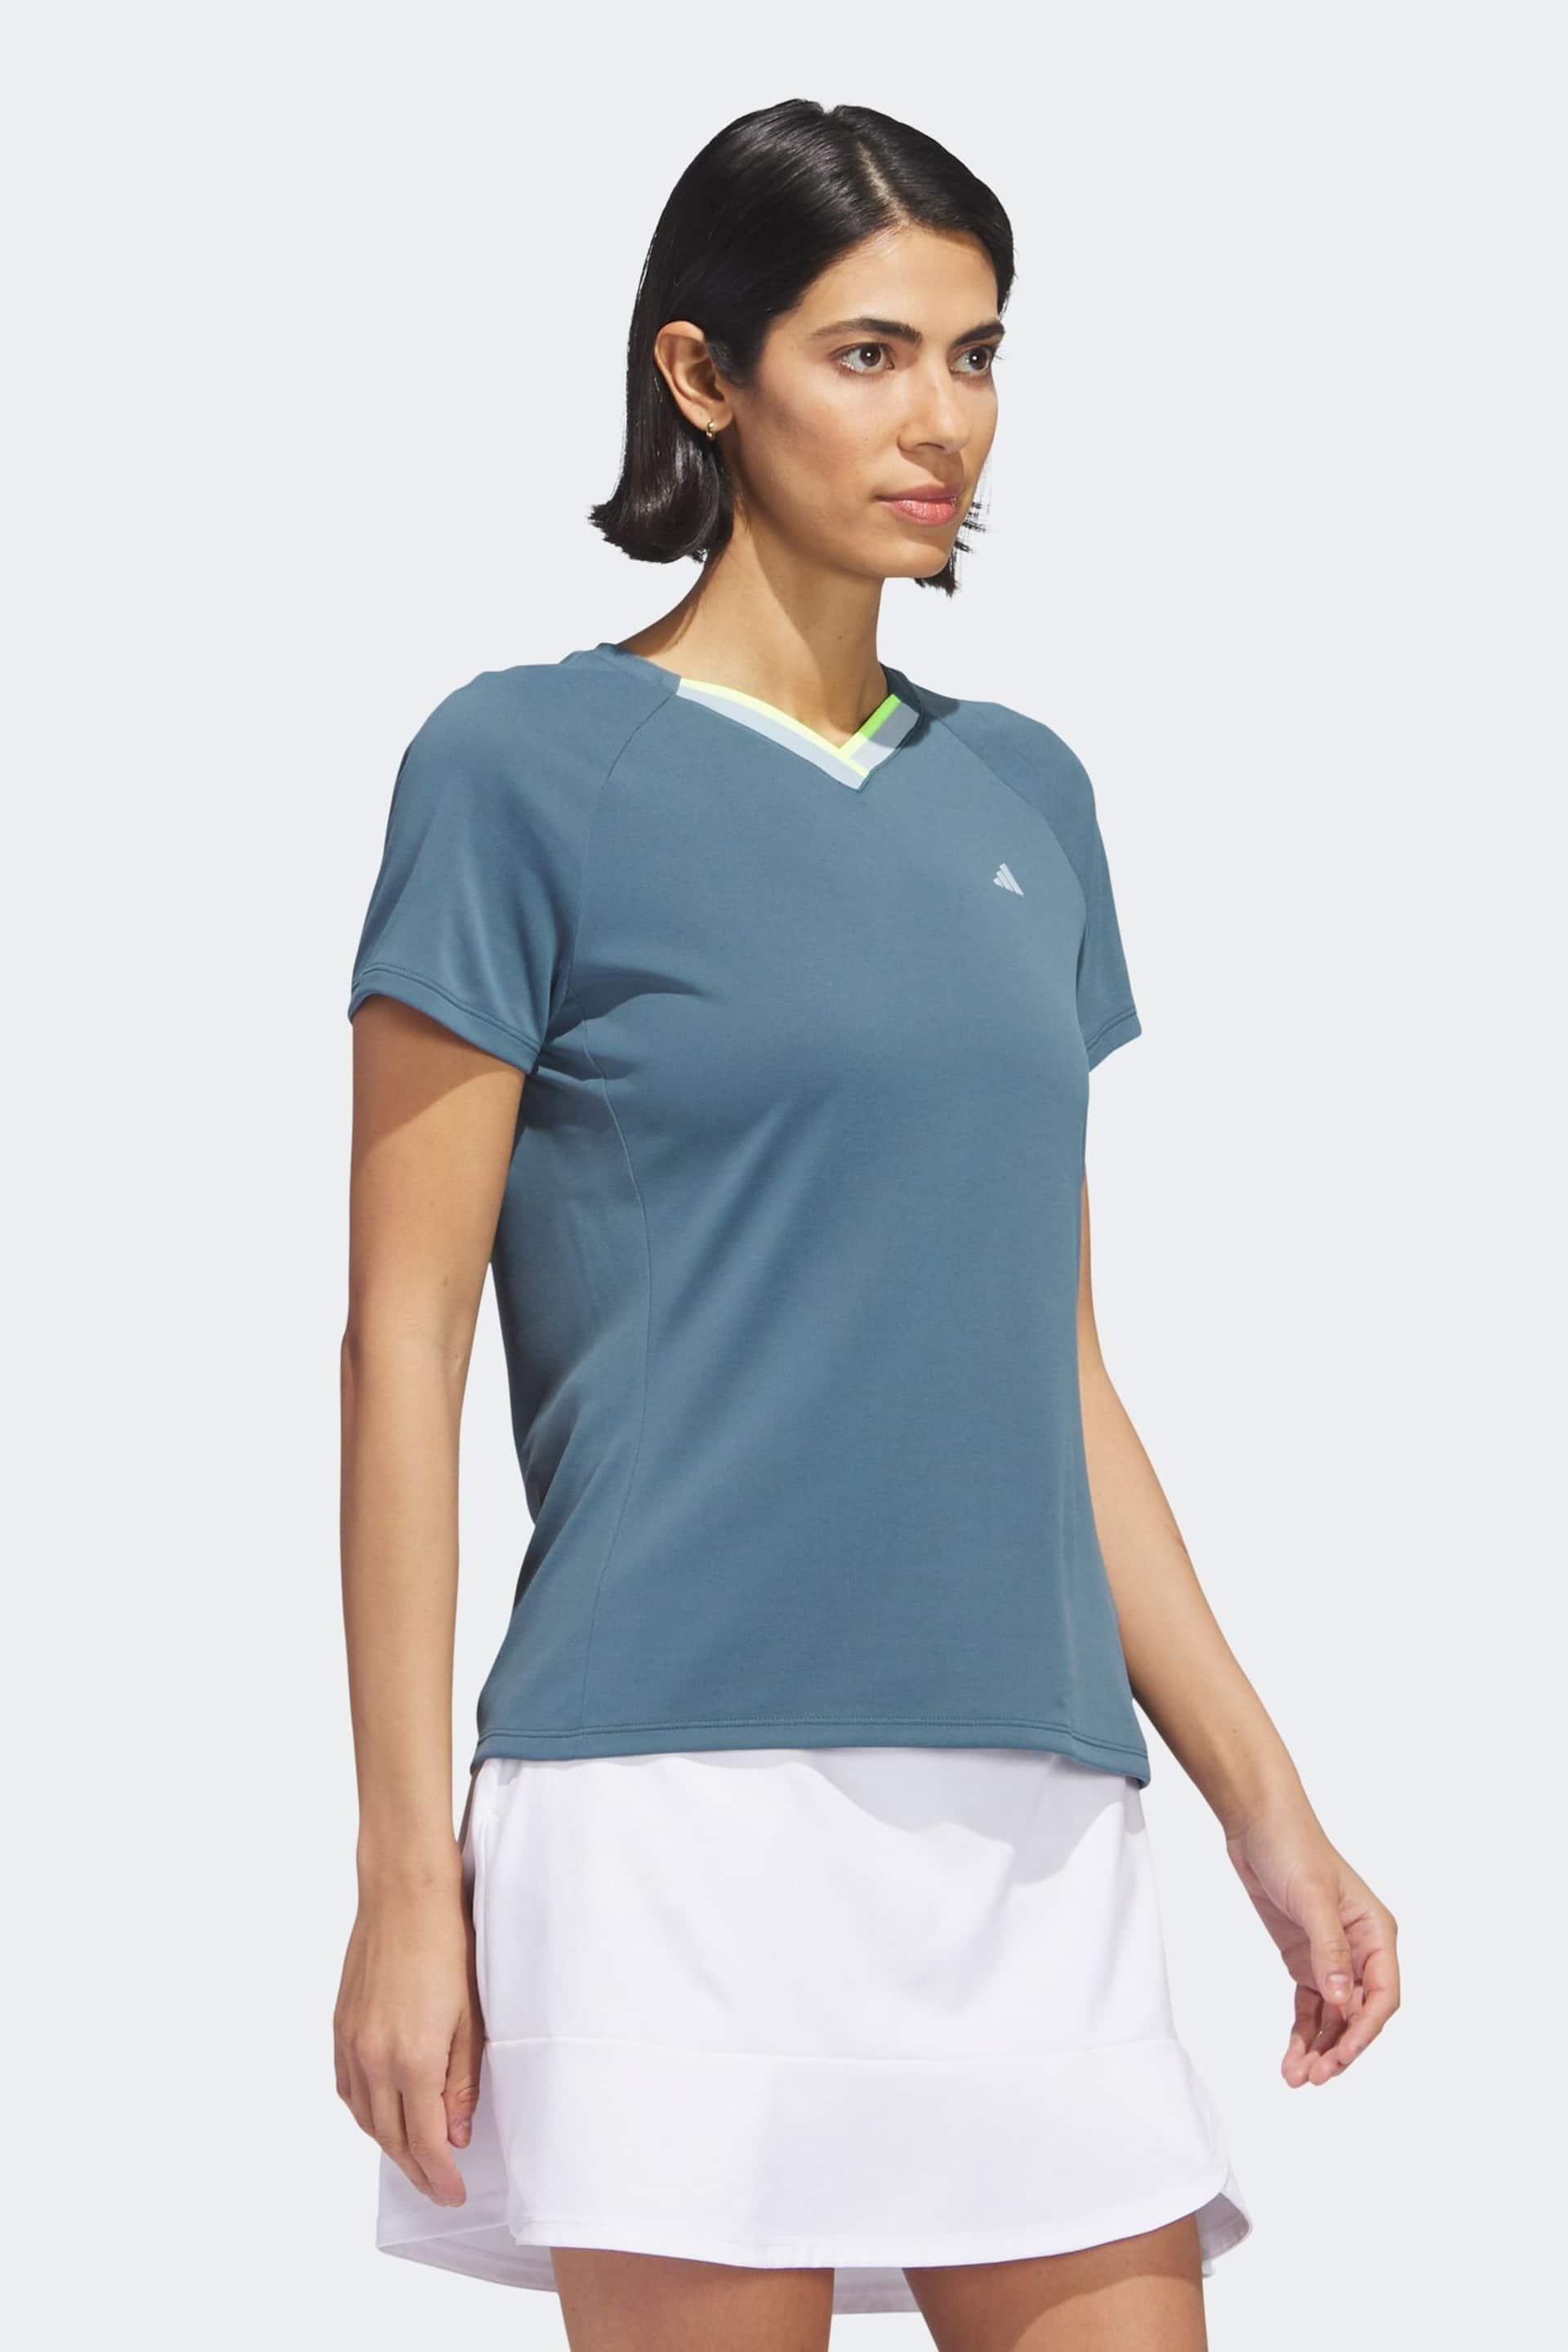 adidas Teal Blue Ultimate365 Tour Heat.rdy V-neck Top - Image 3 of 8